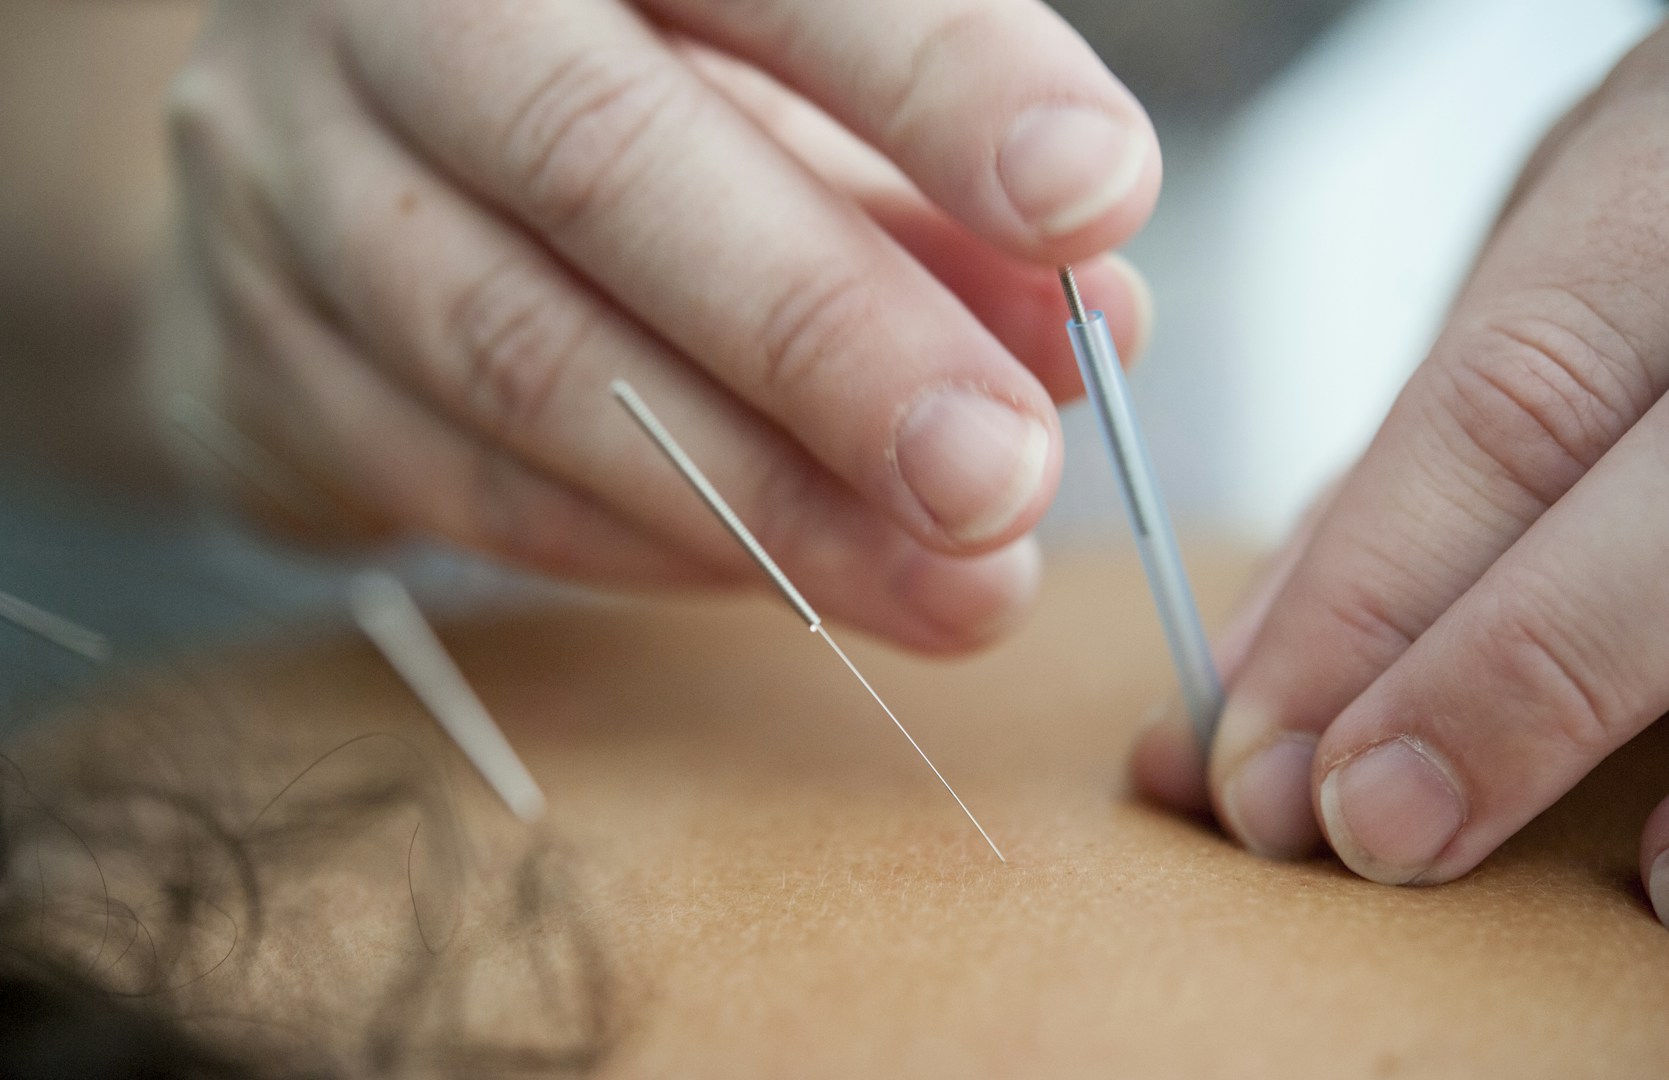 acupuncture dry needling therapy treatment on persons back